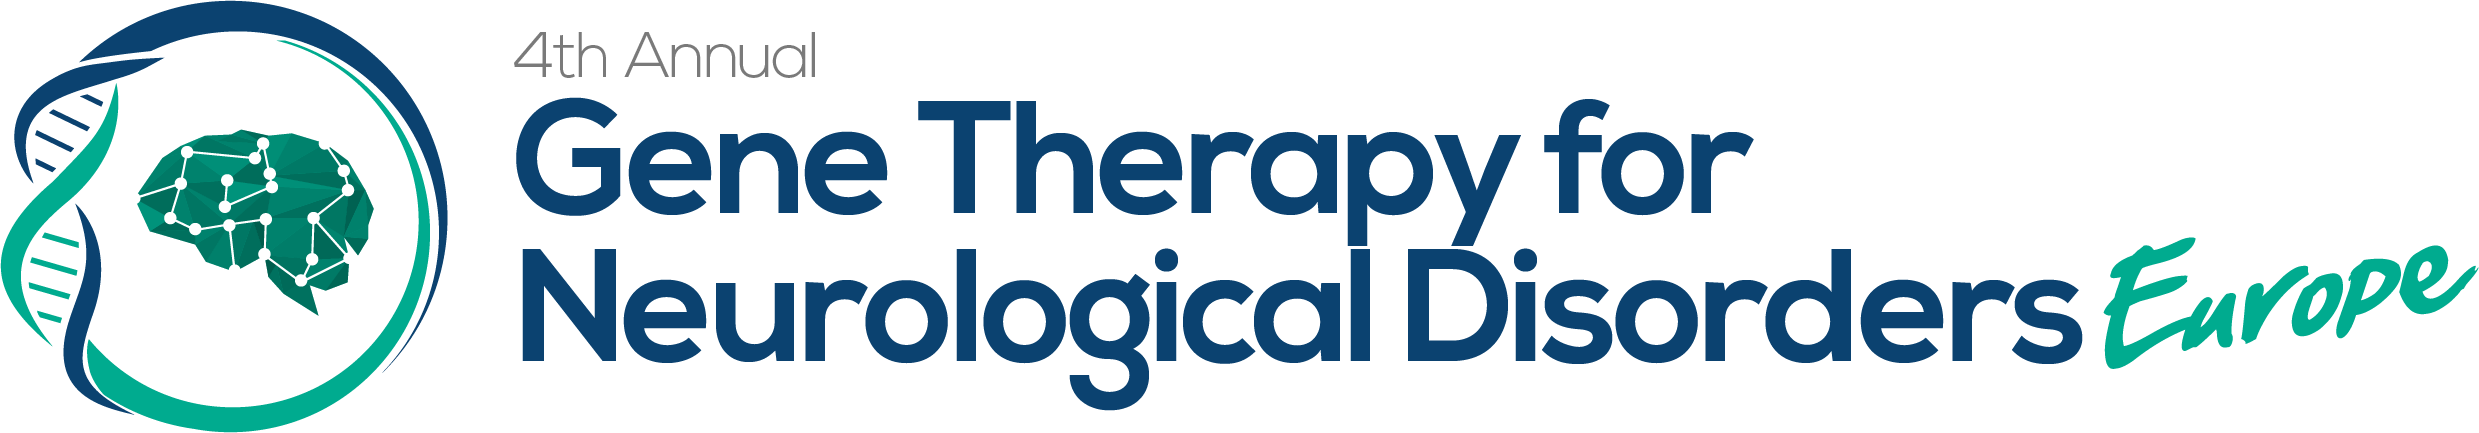 HW221209 4th Gene Therapy for Neurological Disorders Europe logo